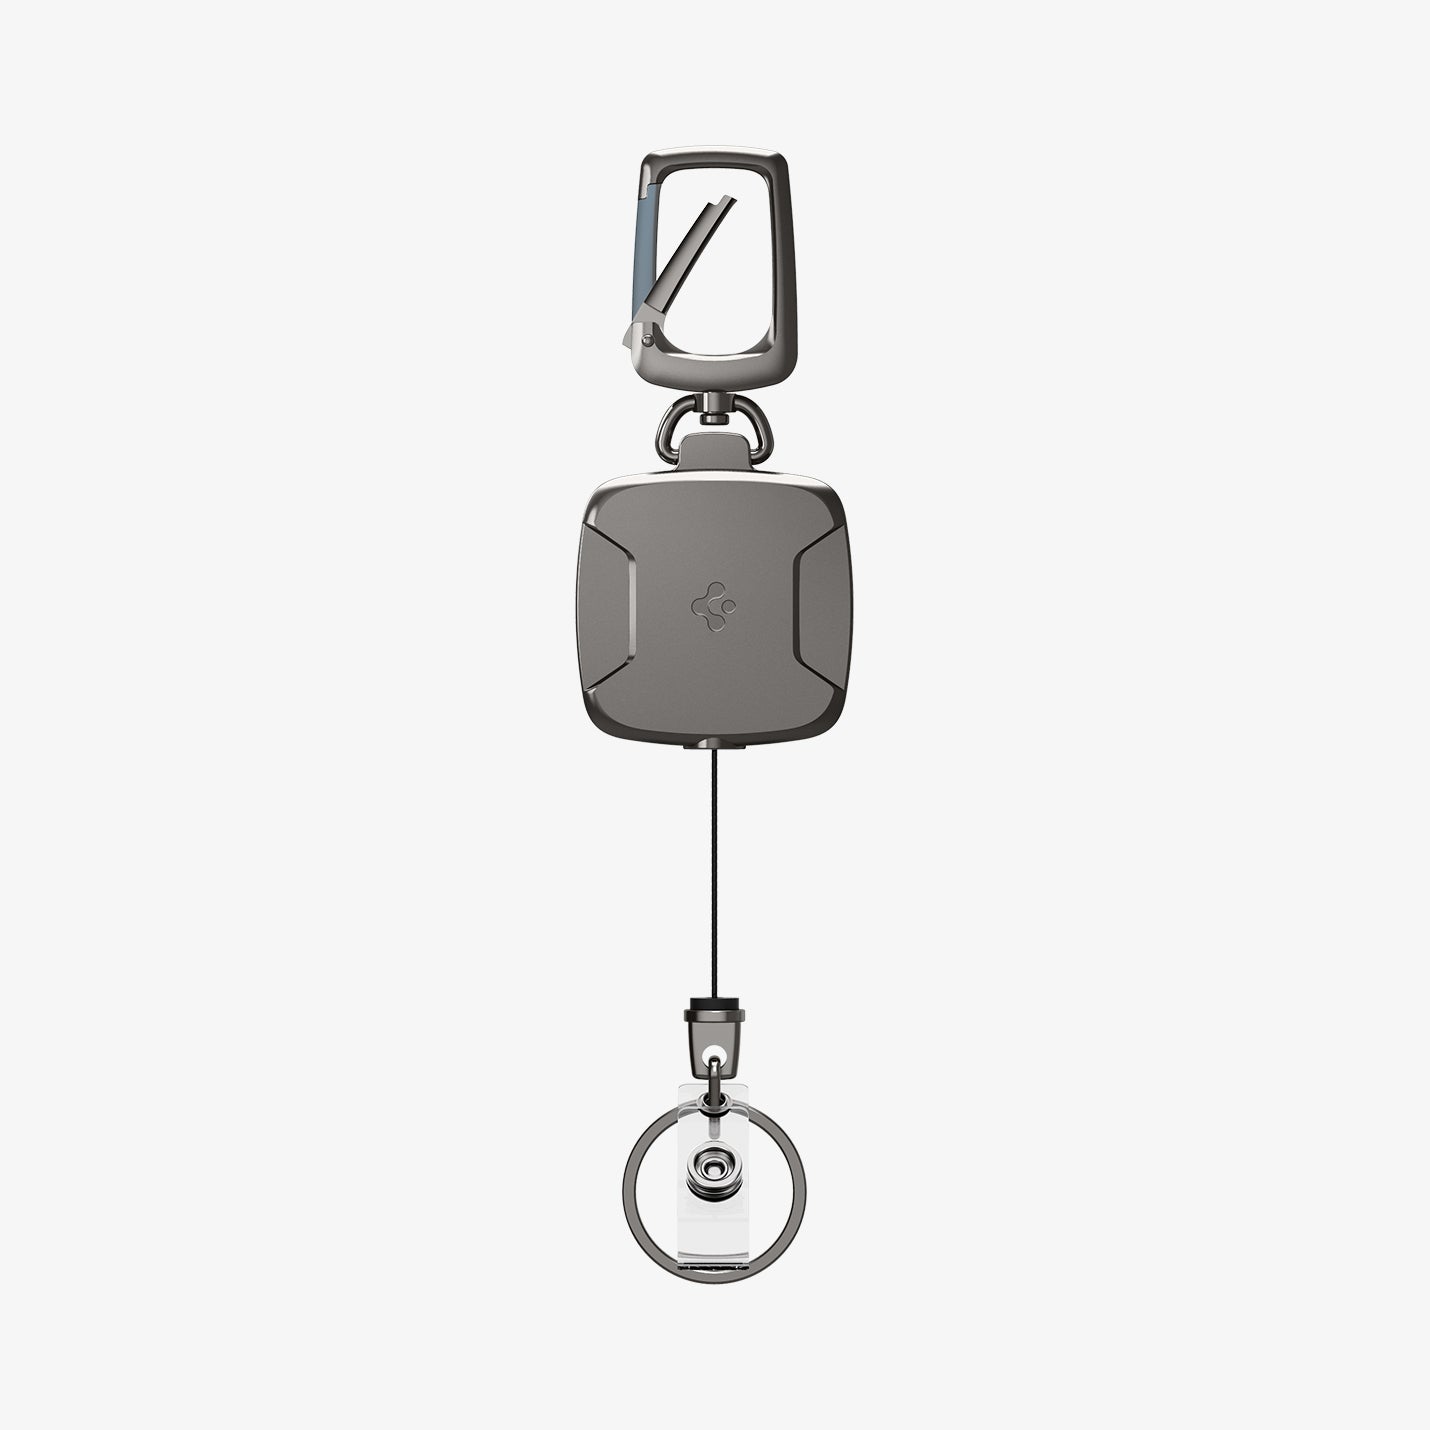 AHP03019 - Carabiner Reel Clip in black showing the front with reel clip extended out slightly